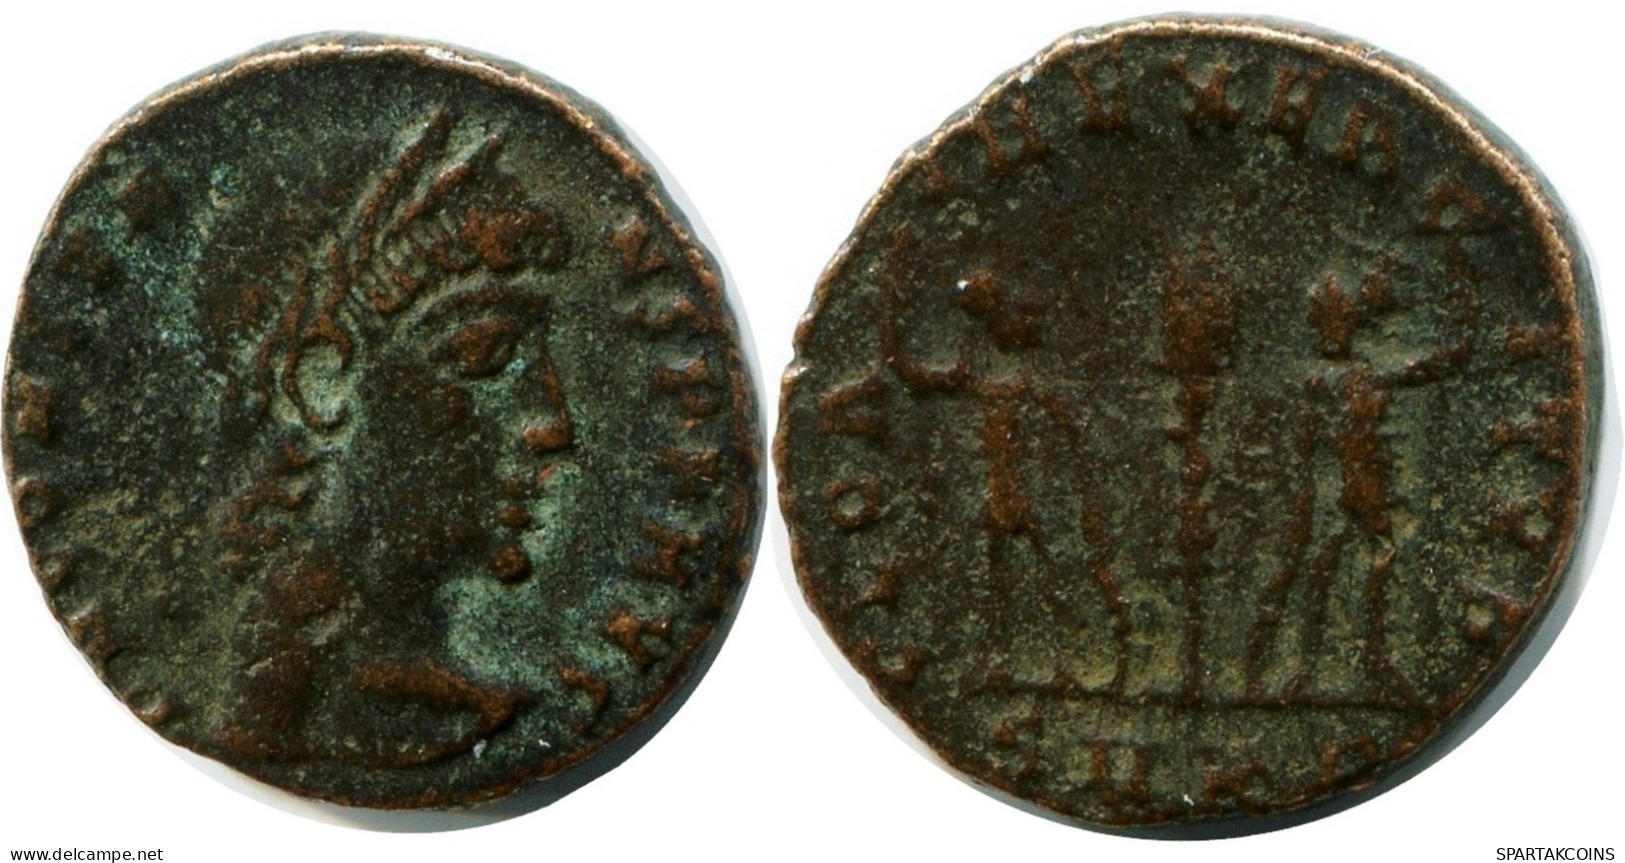 CONSTANS MINTED IN CYZICUS FROM THE ROYAL ONTARIO MUSEUM #ANC11650.14.D.A - The Christian Empire (307 AD To 363 AD)